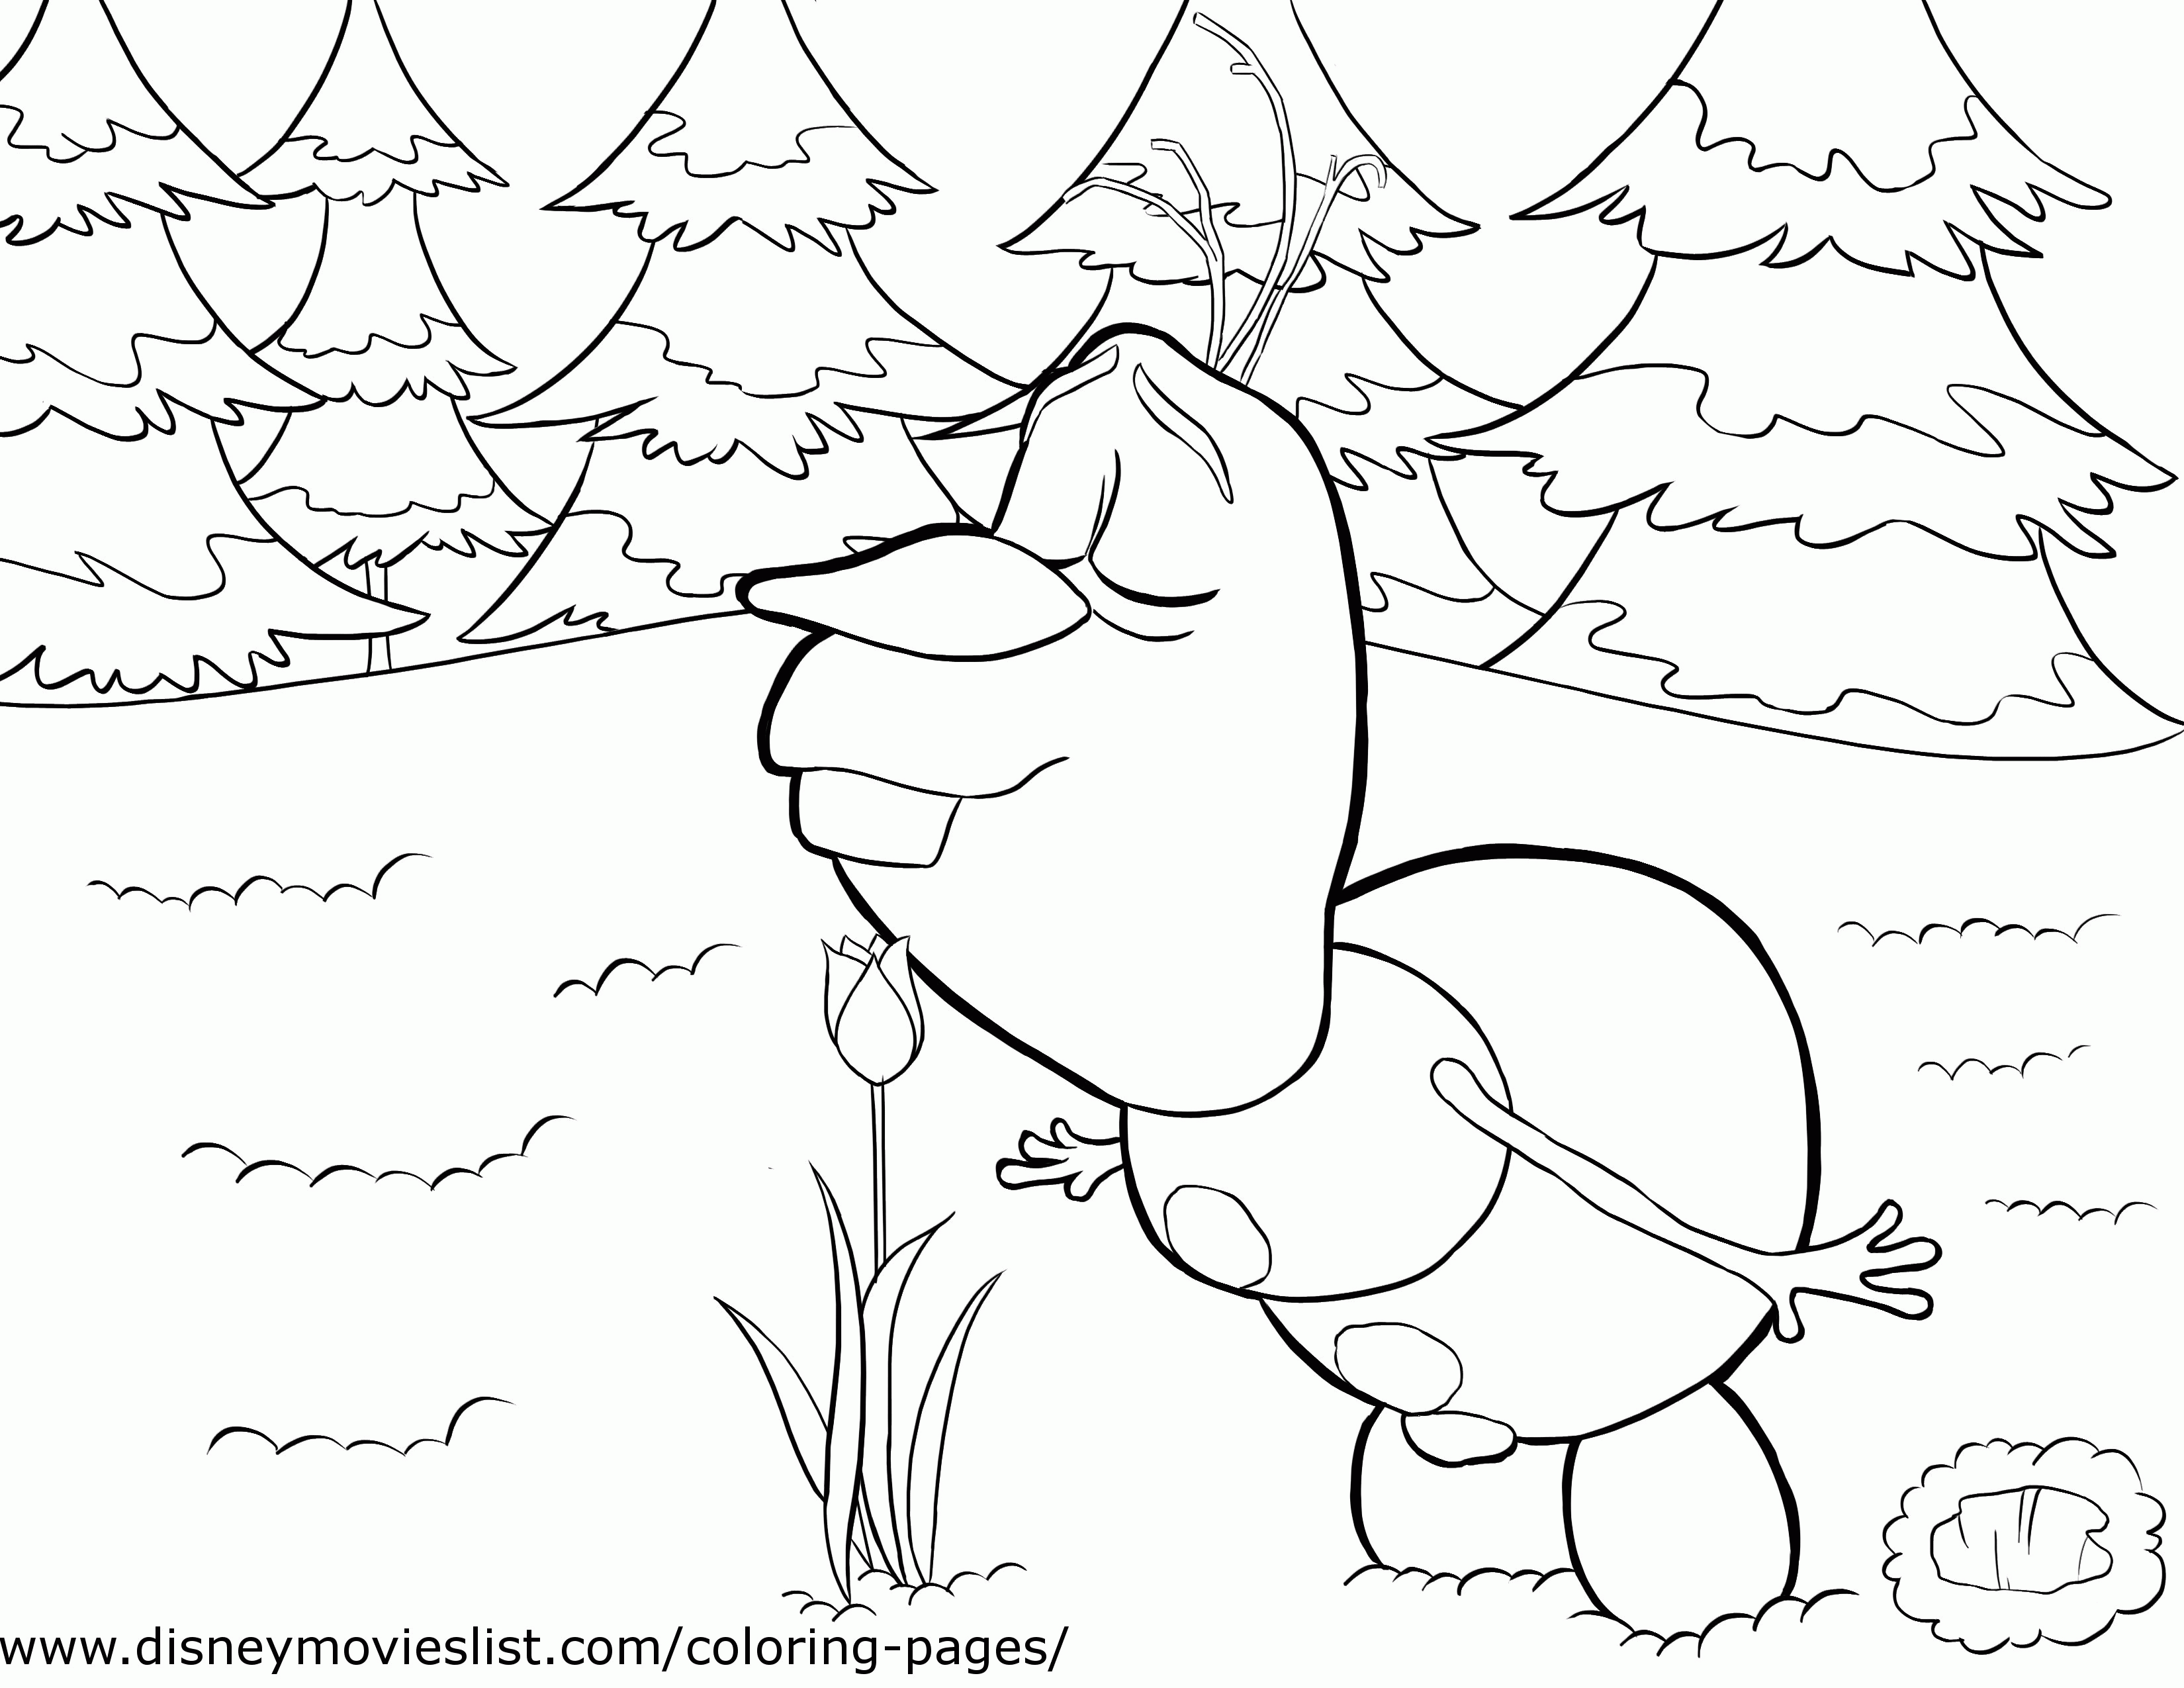 Frozen Coloring Pages Pdf - Coloring Home